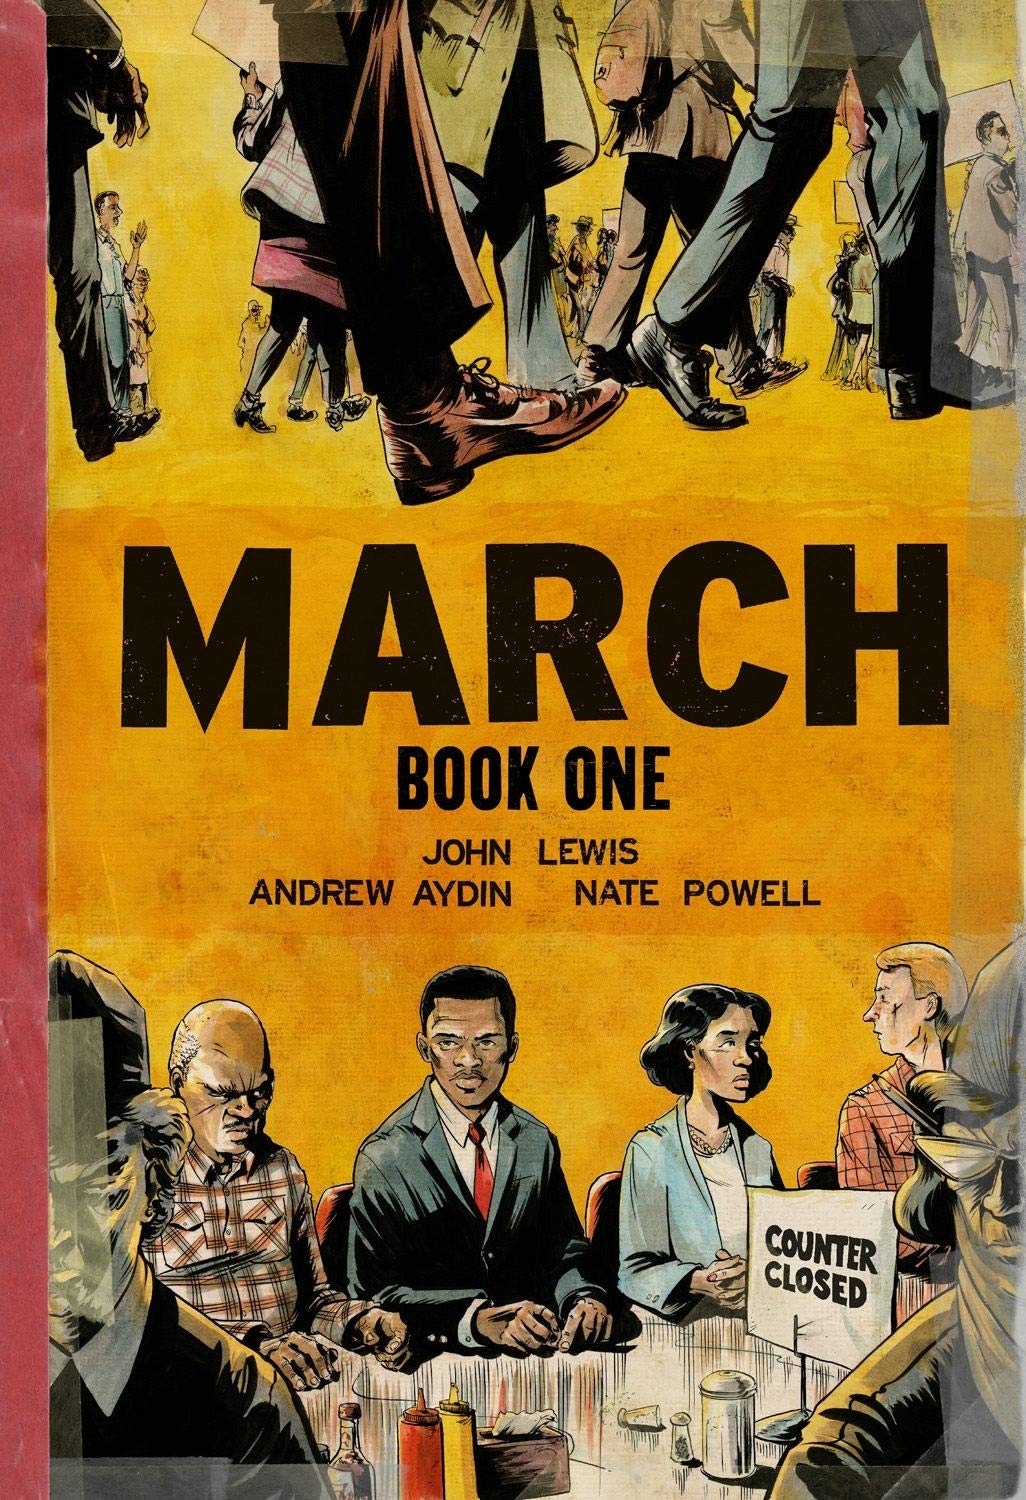 March Book One by John Lewis